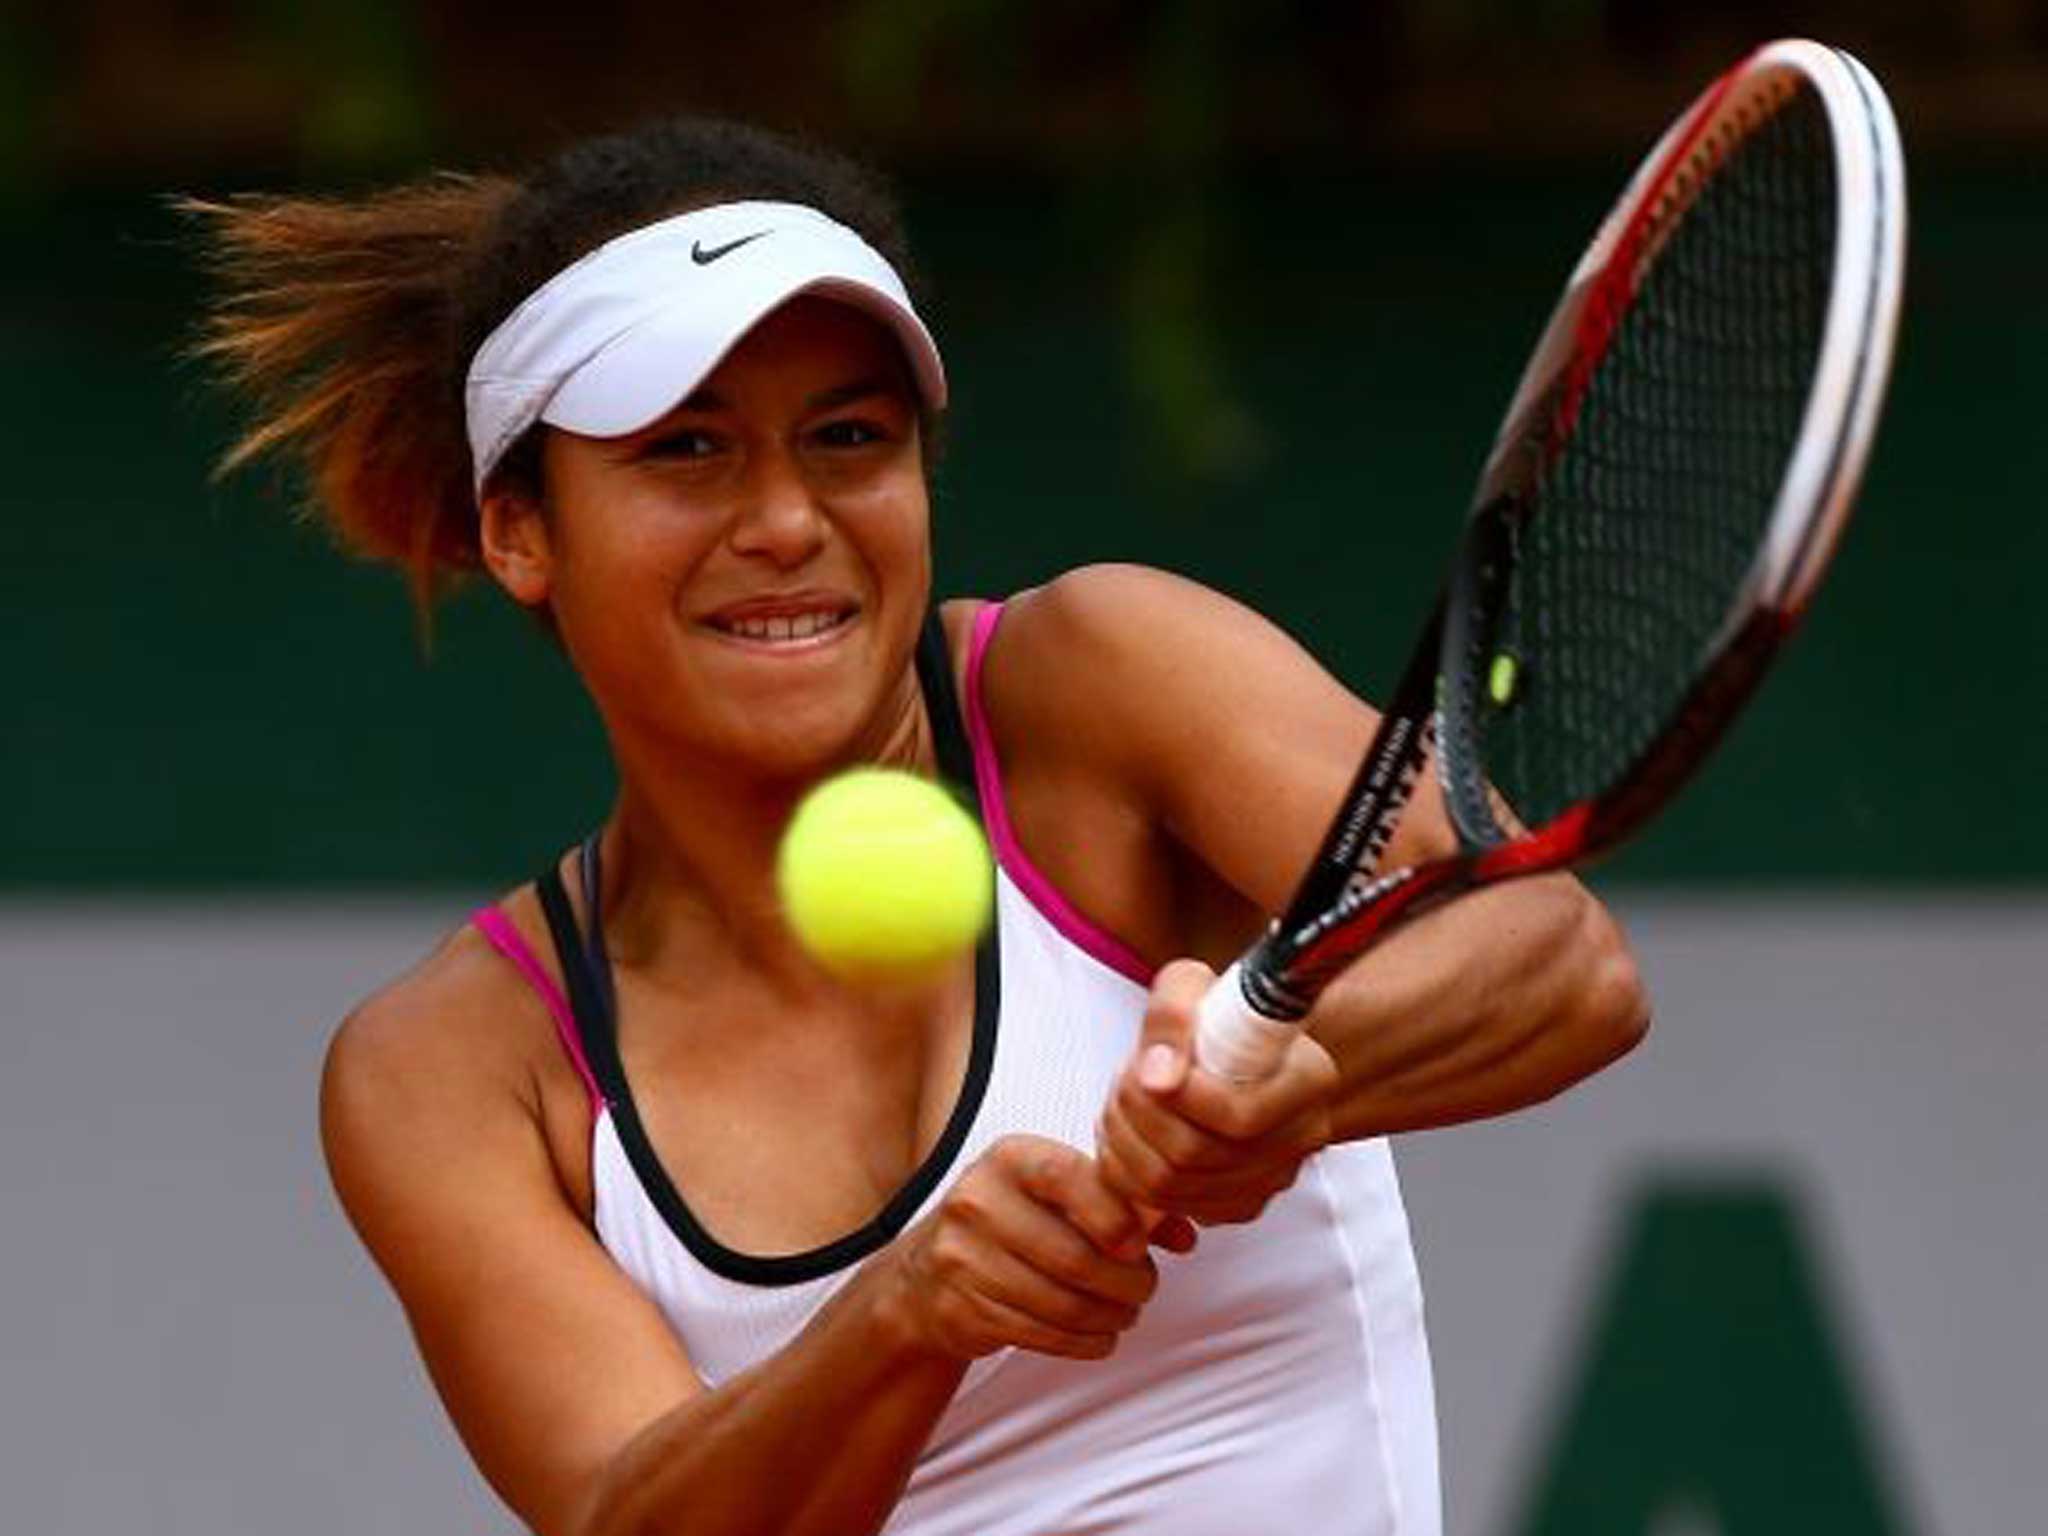 Elementary: Heather Watson wins 6-1 6-1 to qualify for the French Open